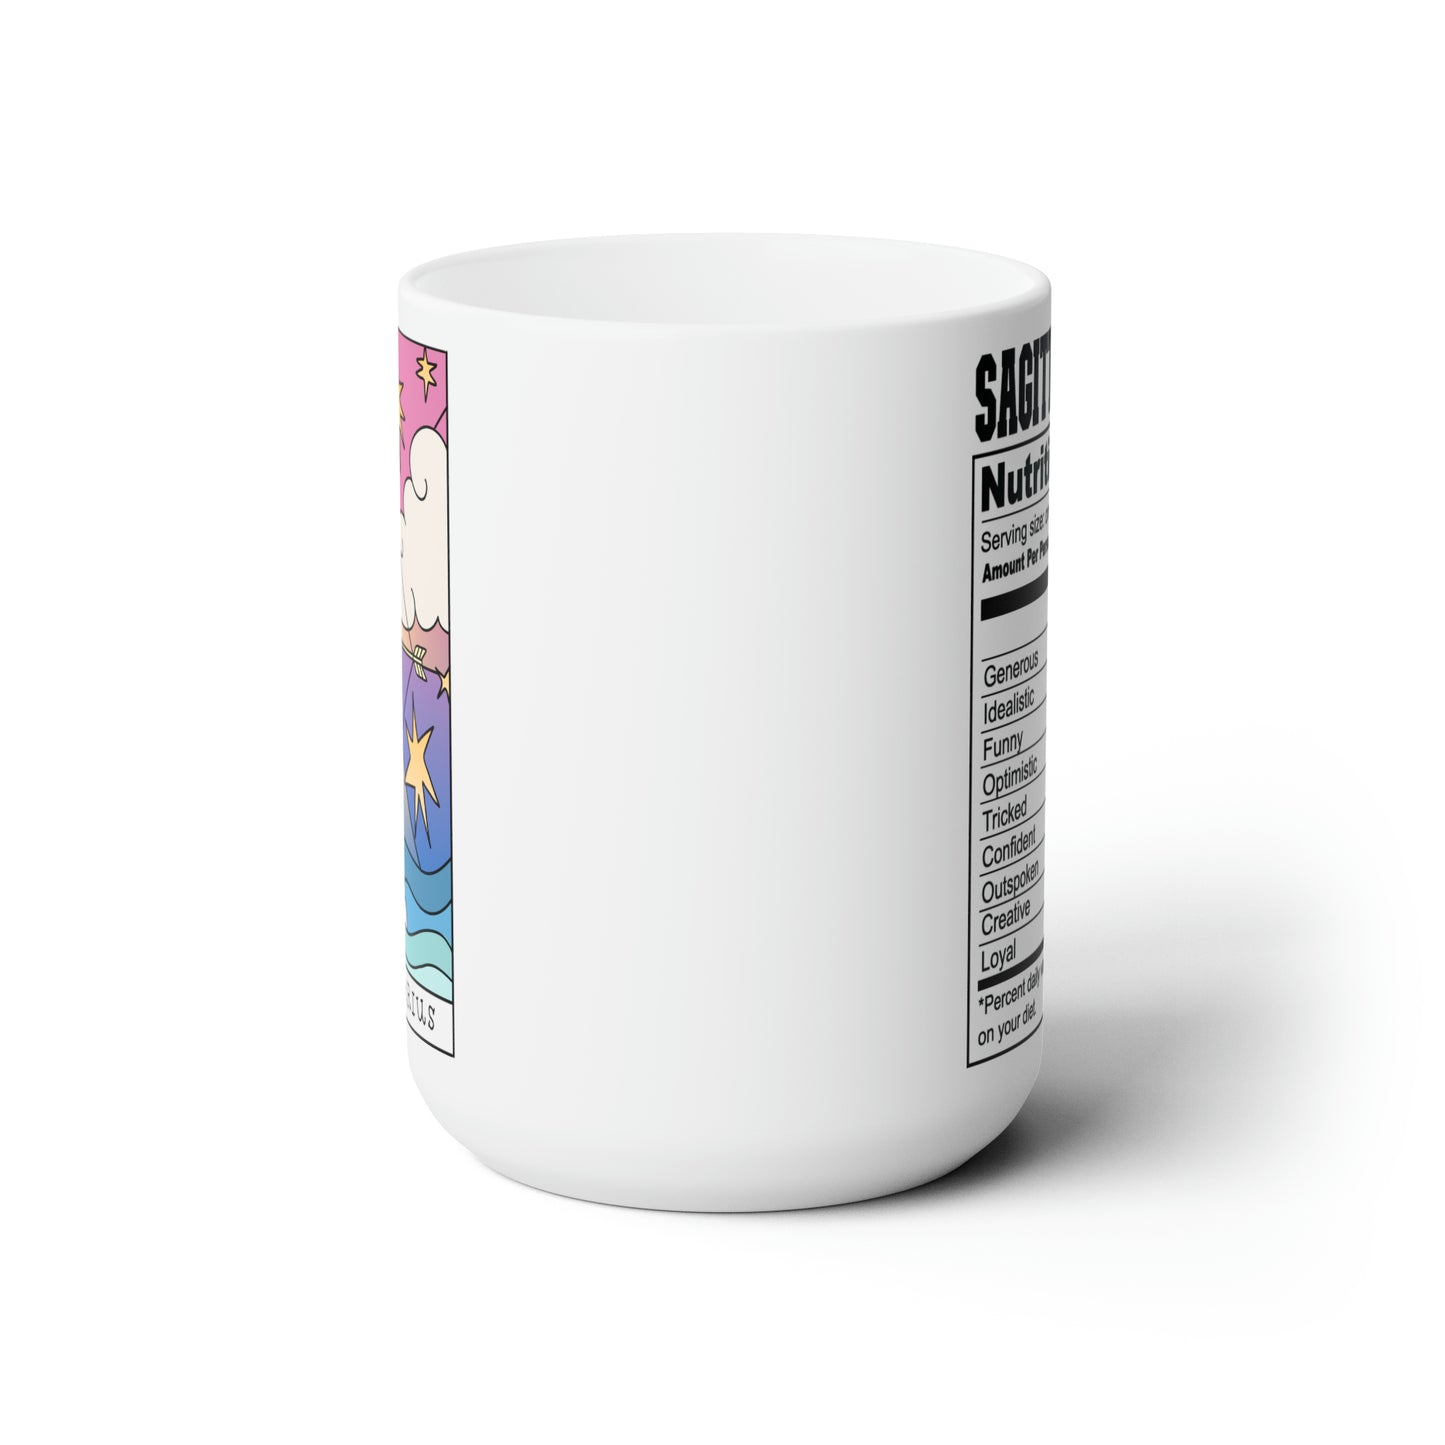 This listing is for a Premium Quality 15oz White Ceramic coffee / tea mug with a double sided Sagittarius Tarot Card